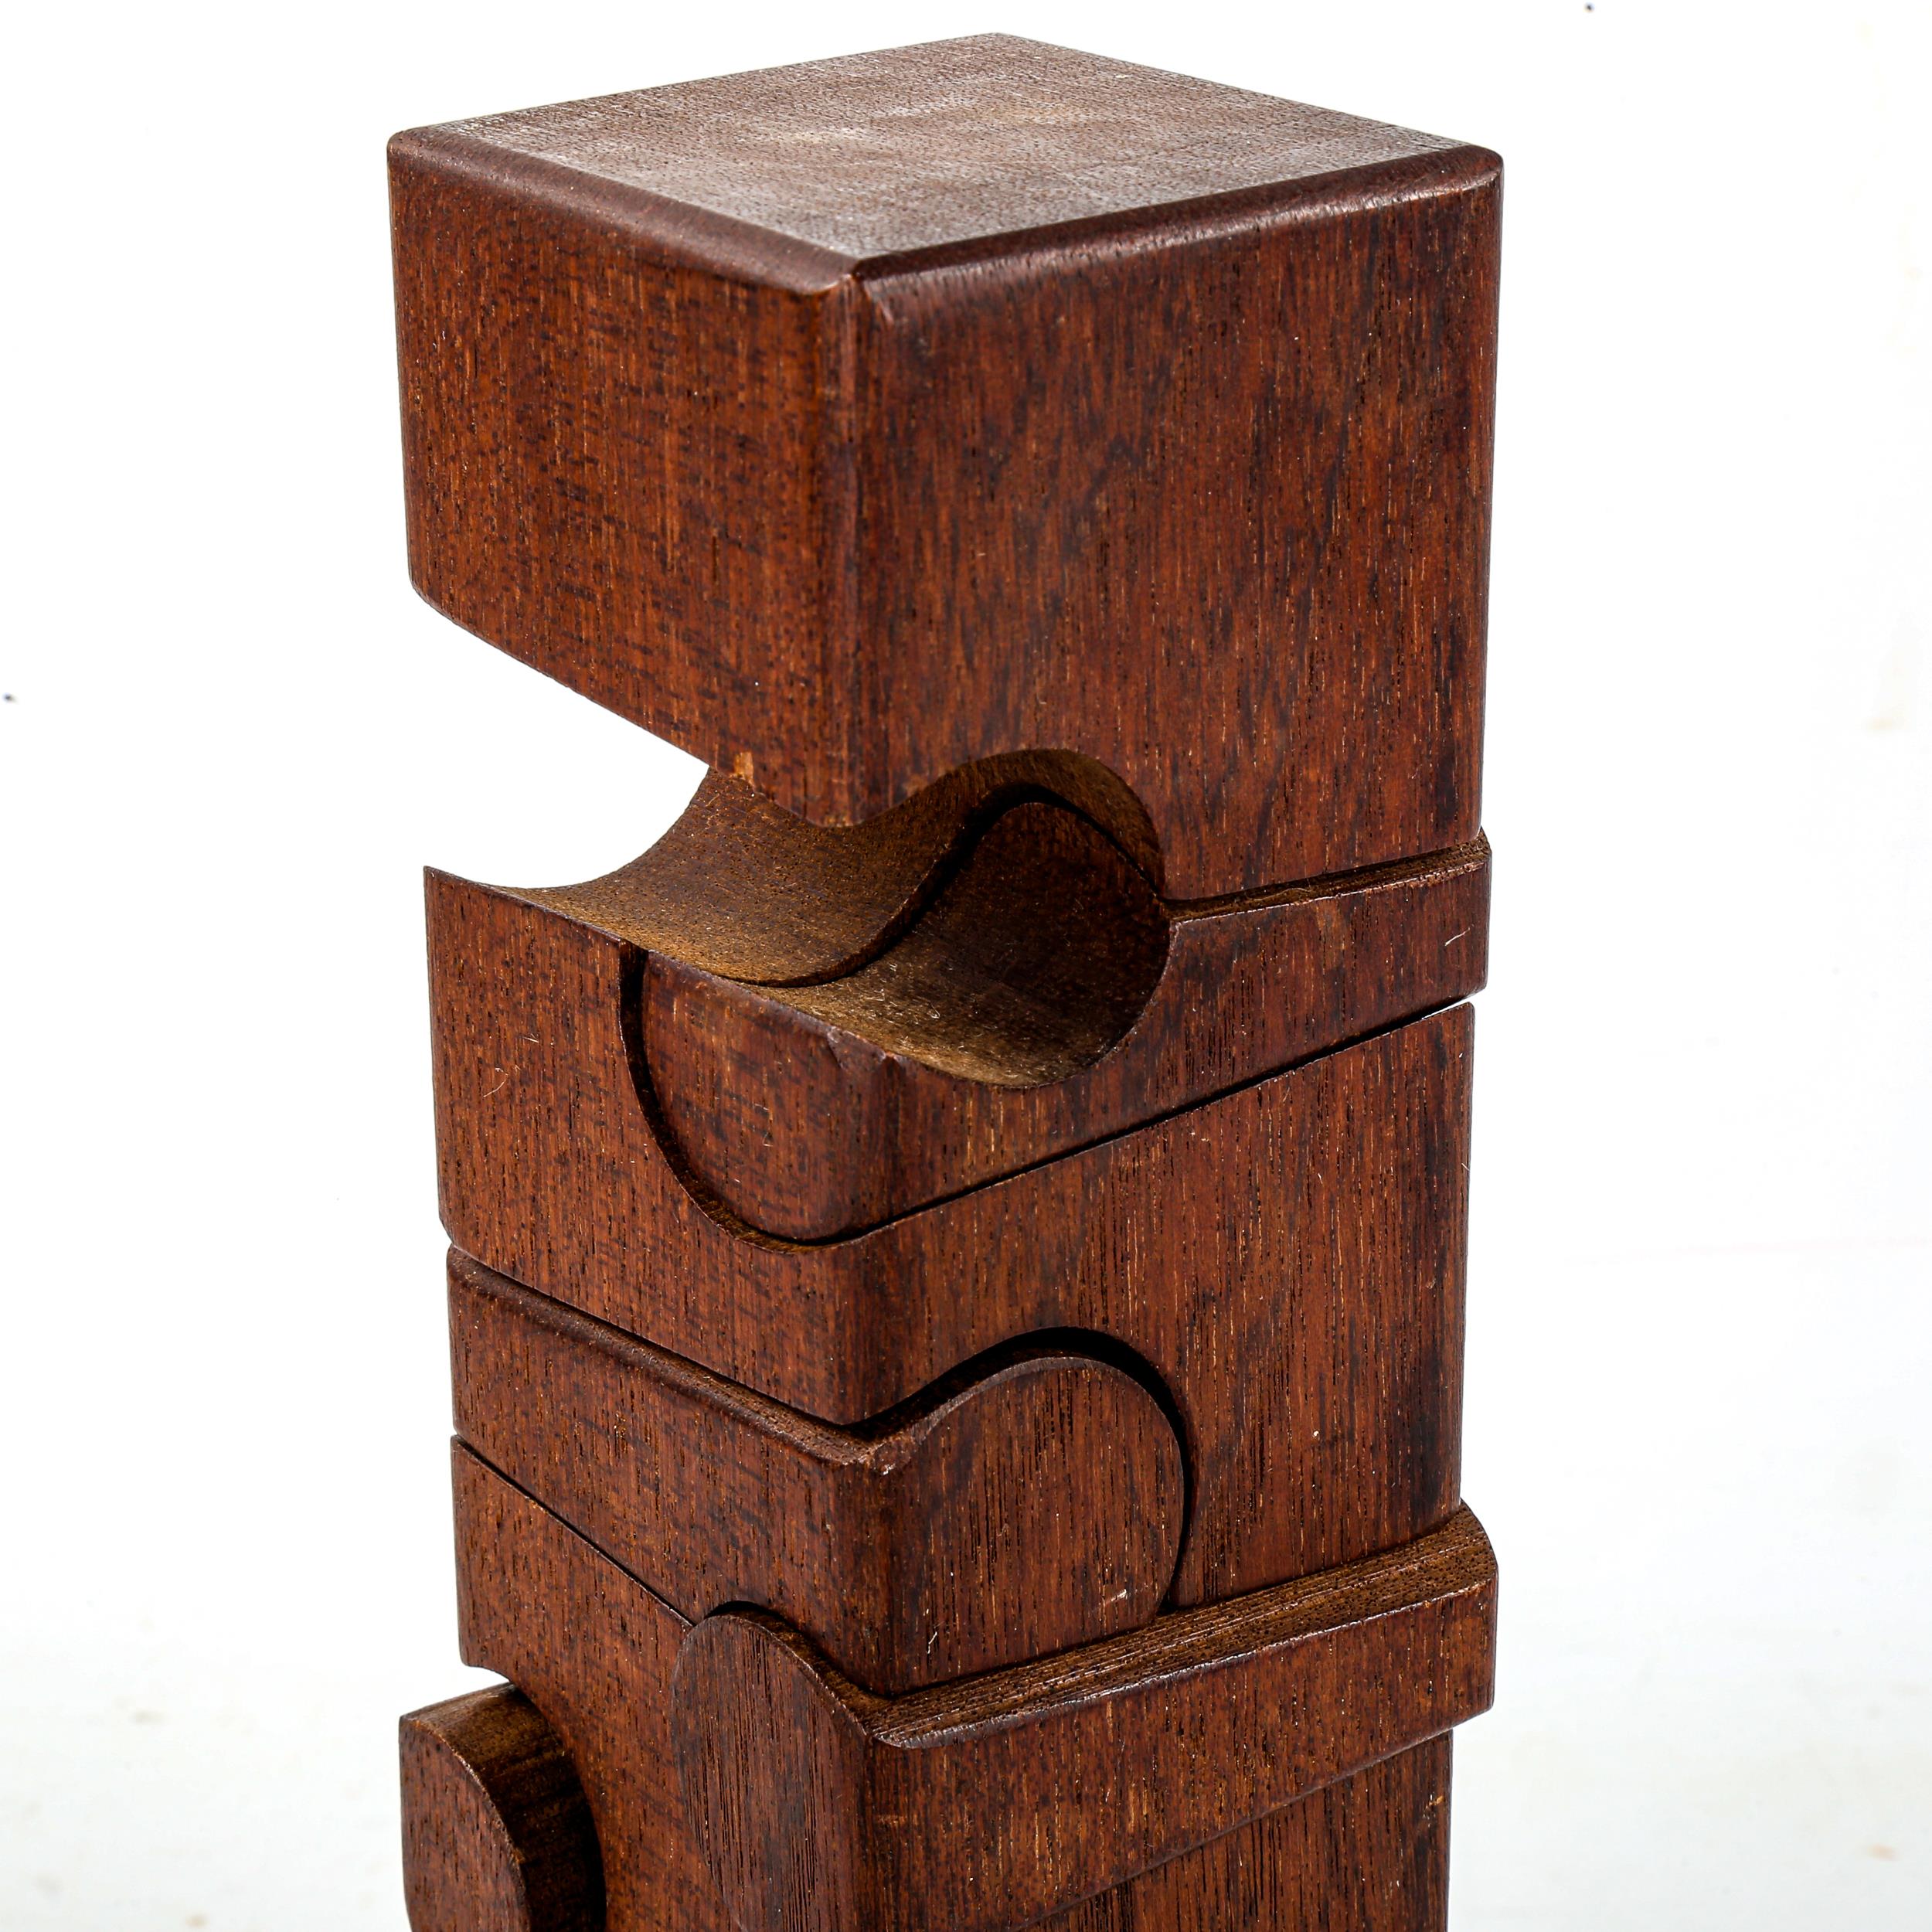 BRIAN WILLSHER, wood peg puzzle sculpture, height 33CM Good condition, pegs are loose in sculpture. - Image 2 of 4